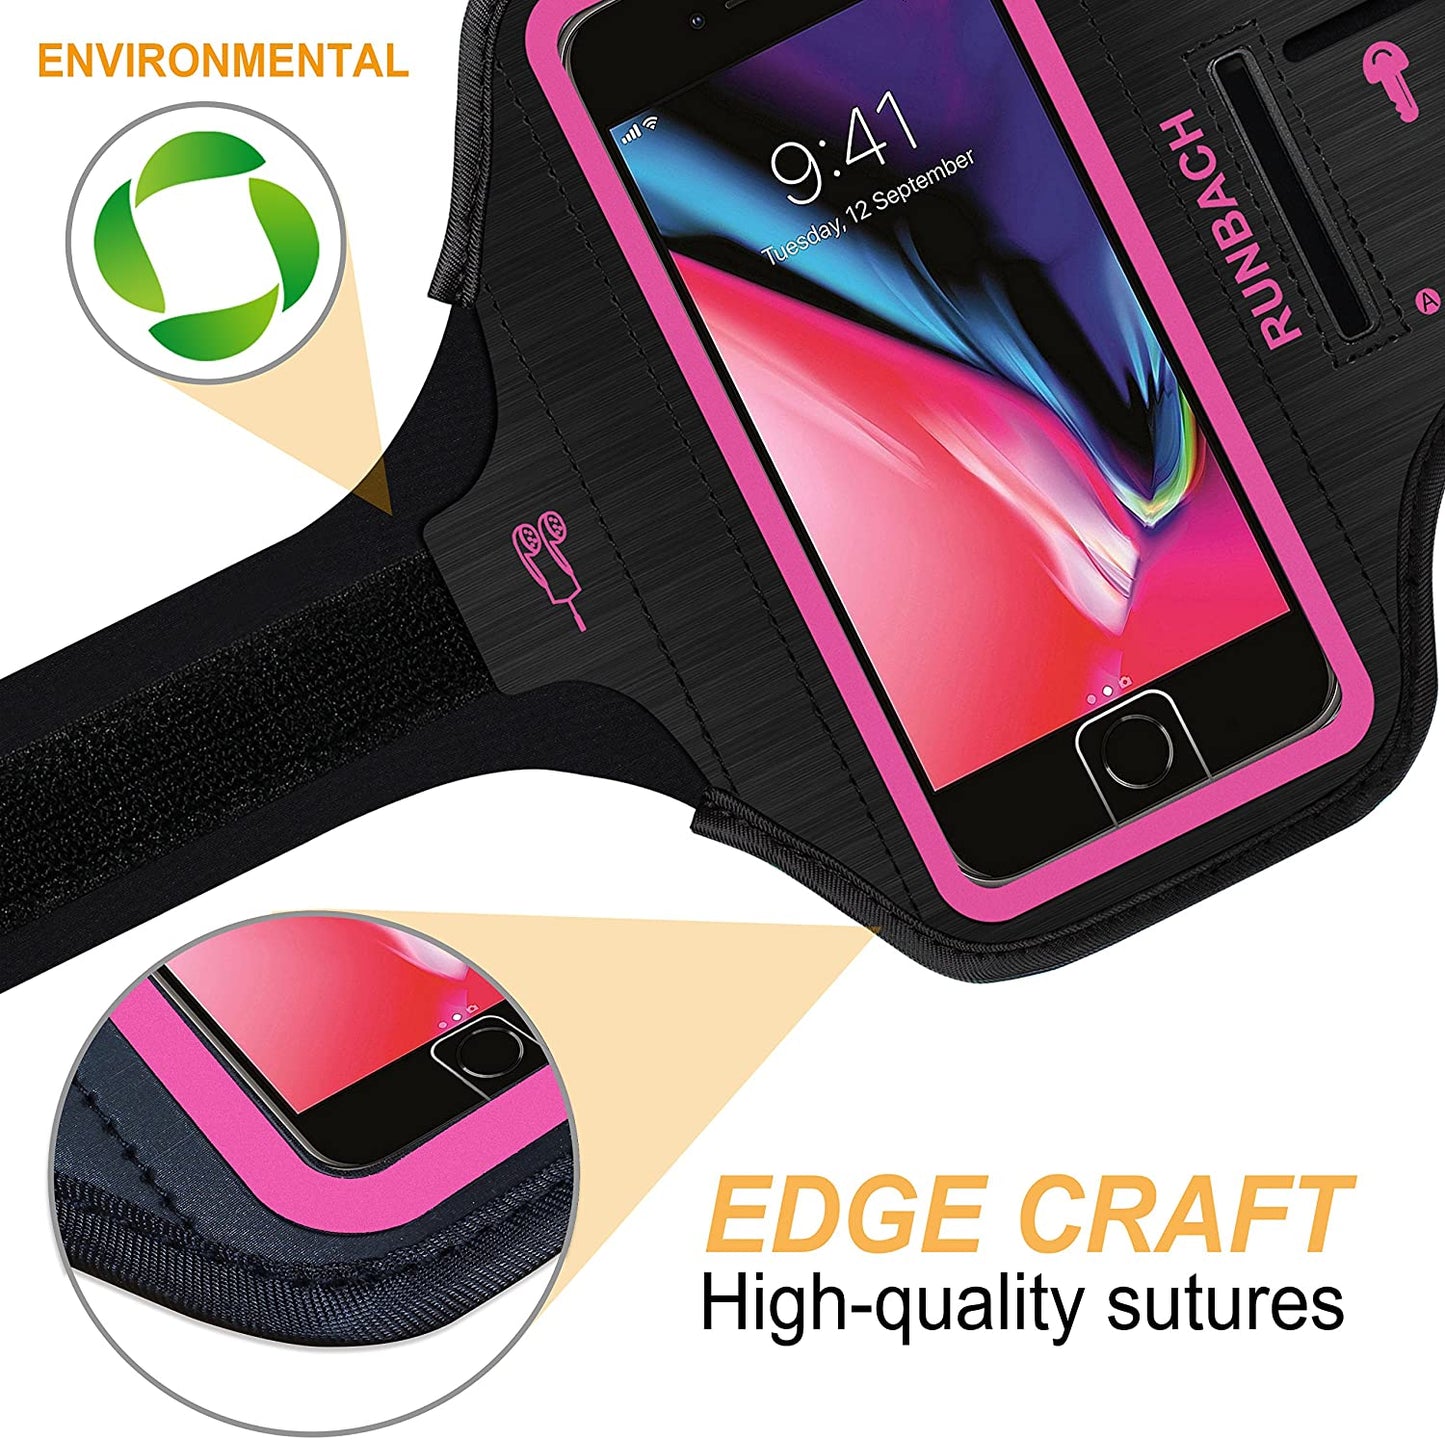  iPhone 8 Plus/iPhone 7 Plus Armband, Sweatproof Running Exercise Gym Bag with Fingerprint Touch/Key Holder and Card Slot for 5.5 Inch iPhone 6/6S/7/8 Plus (Pink)